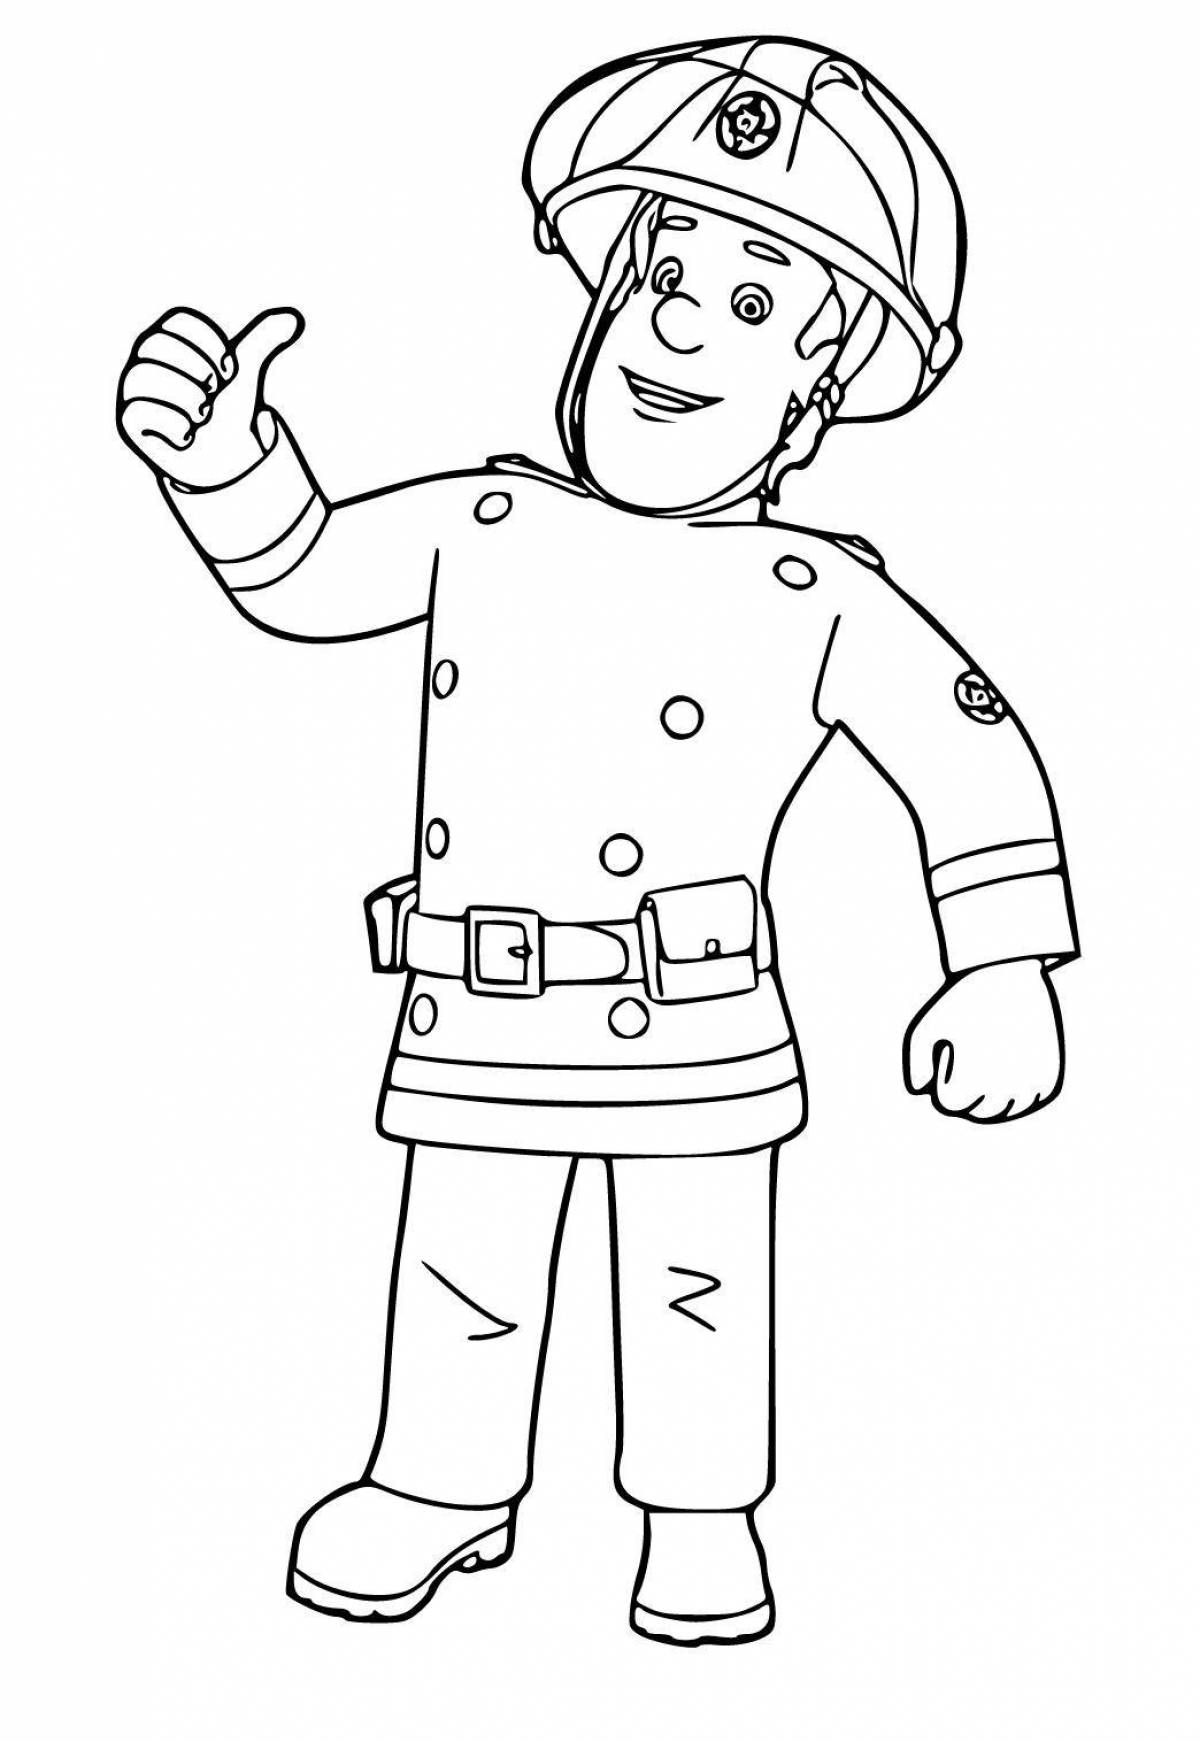 Exciting fireman drawing for kids